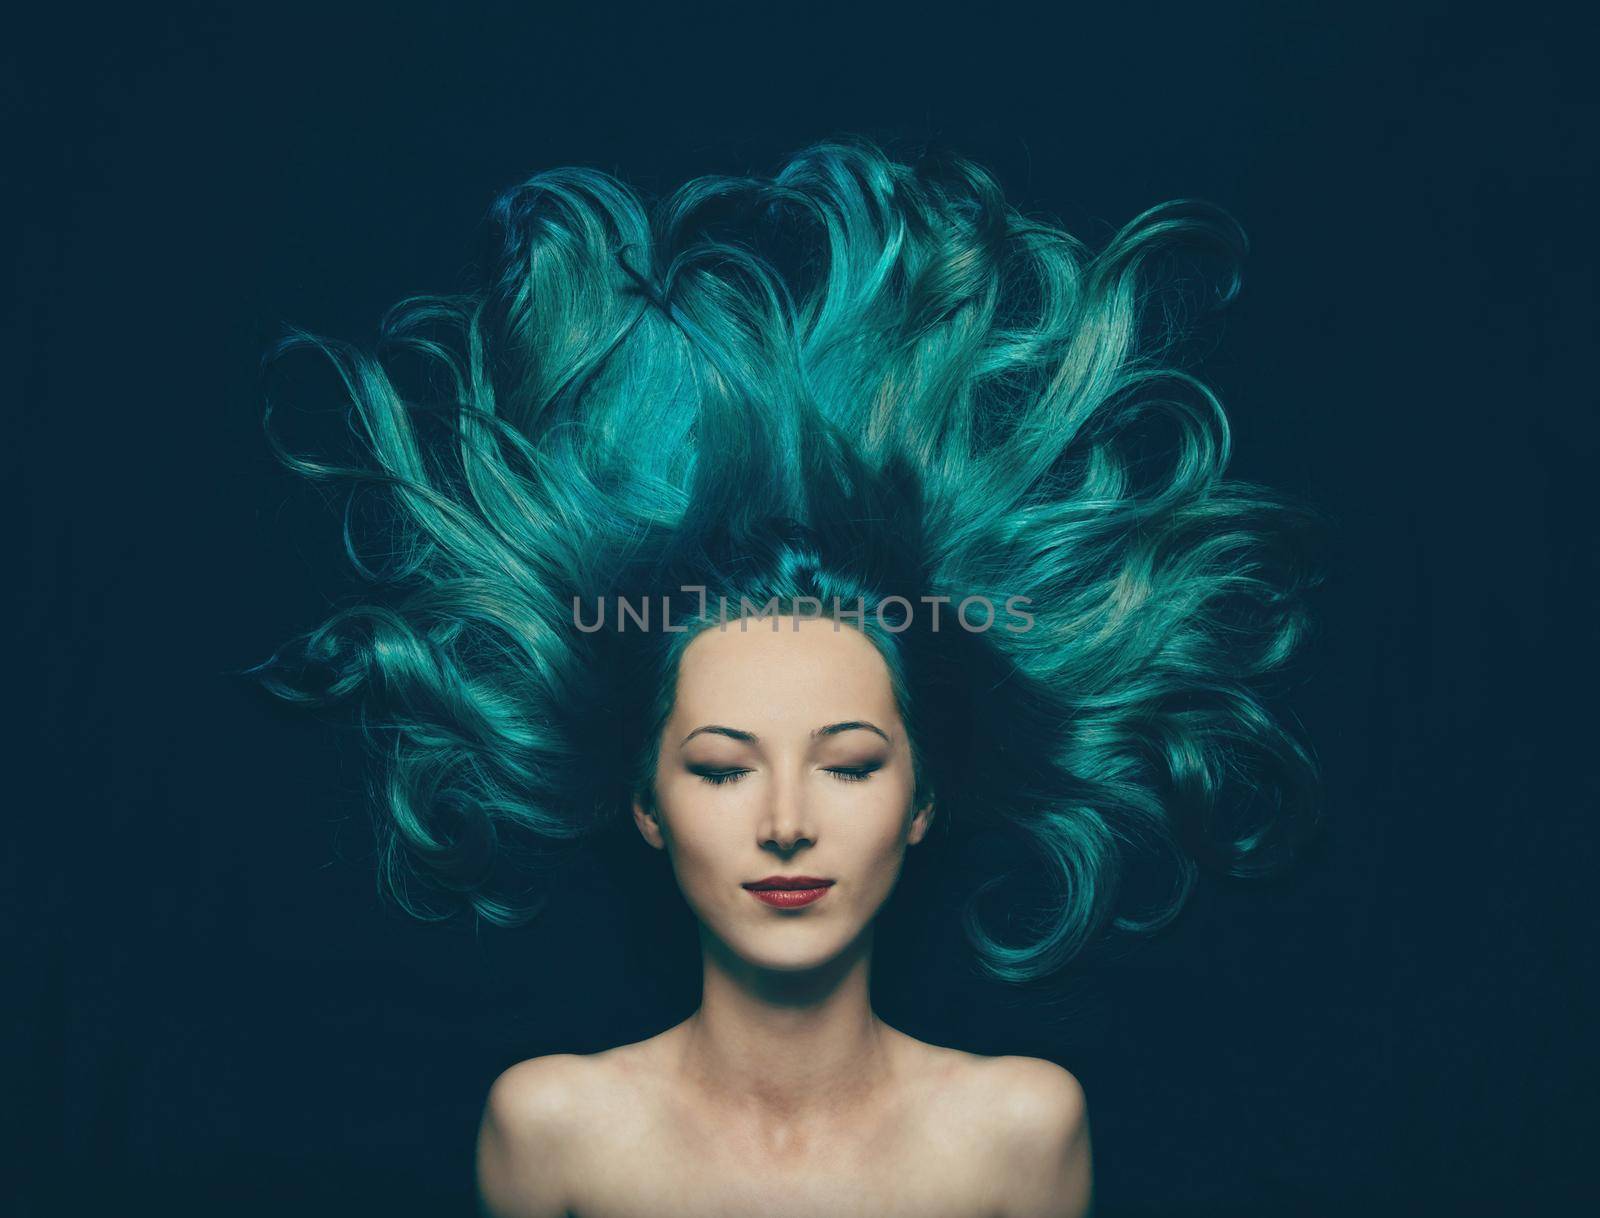 Portrait of smiling beautiful girl with closed eyes and long hair of turquoise color, top view. Image of mermaid